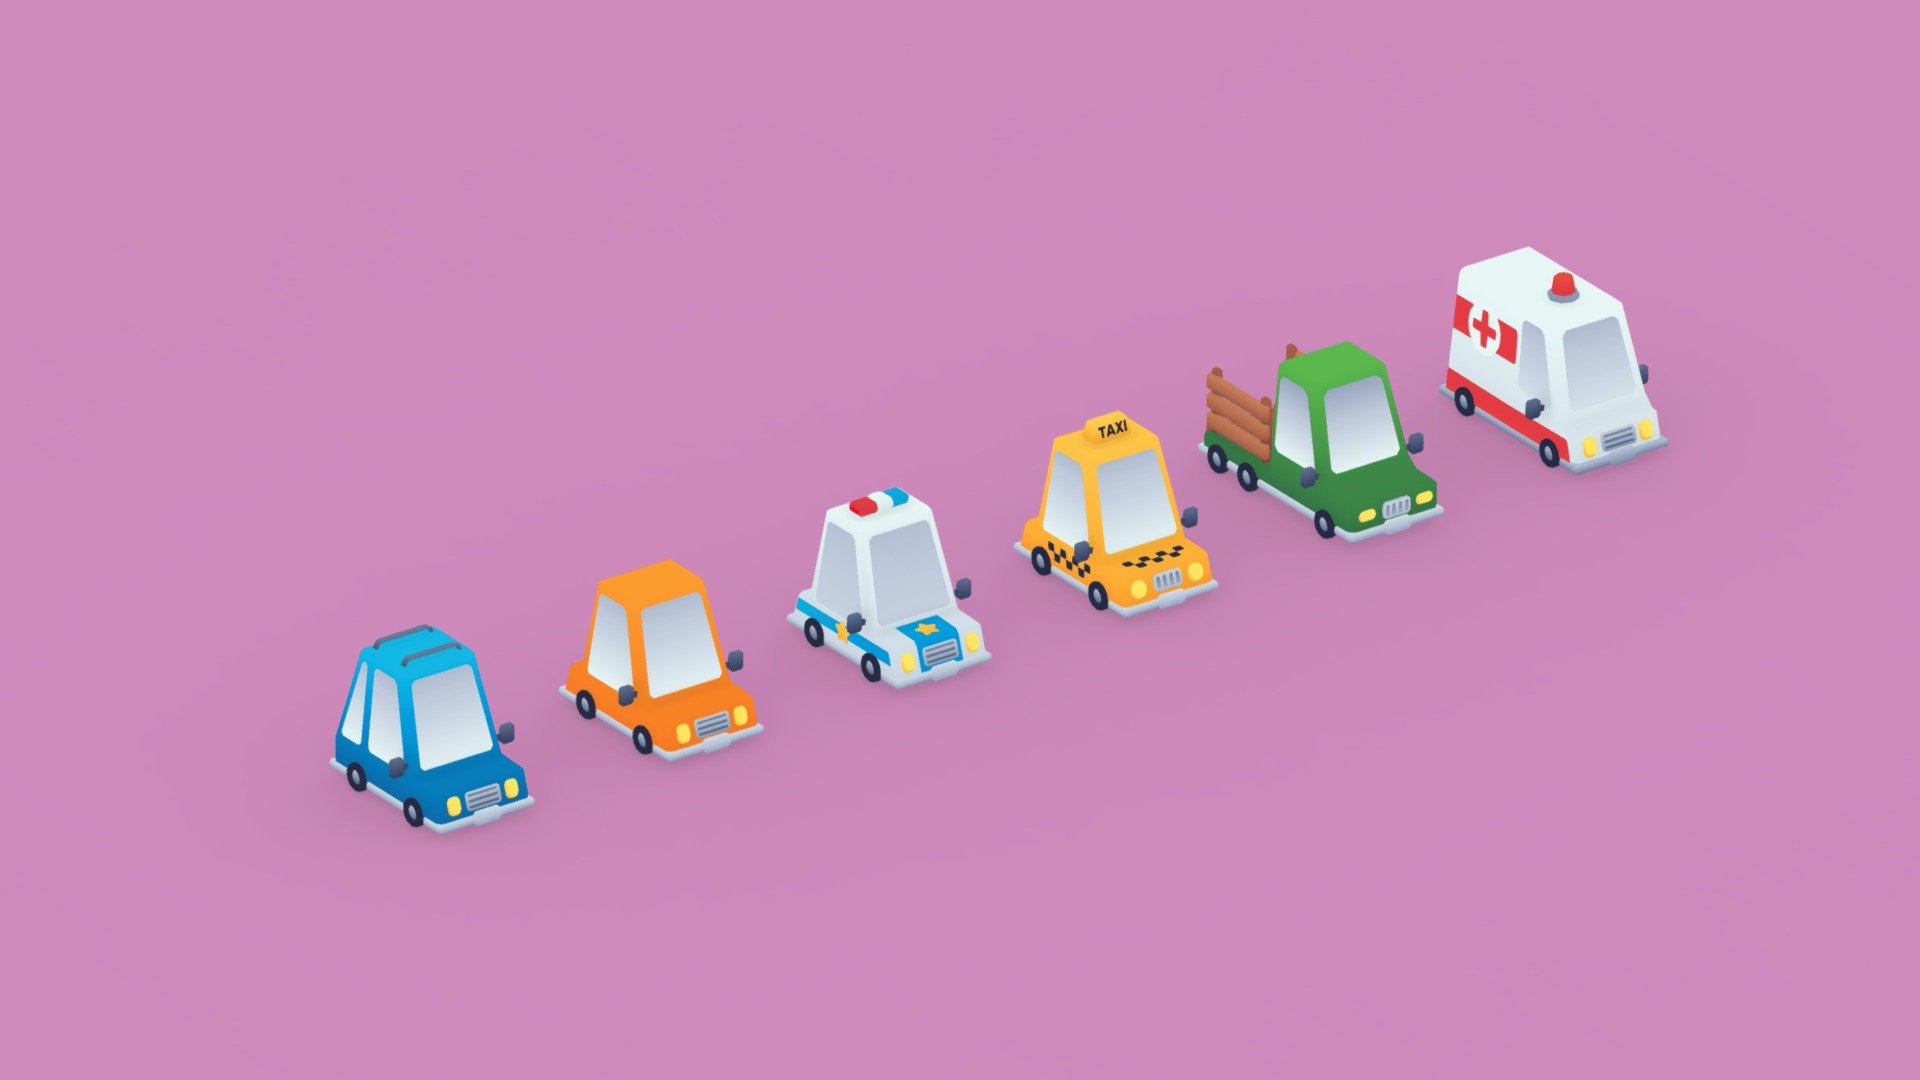 CuteCars: Toony Lowpoly Cars contains 6 customizable cars in cute toony style.




Optimized and mobile friendly

Customizable.

Only 1 texture for 6 models.

Cute and sweet

The clean stylized look will make your game stand out among other competitors. Enjoy!

Link to the asset - CuteCars - 3D model by eugeen 3d model